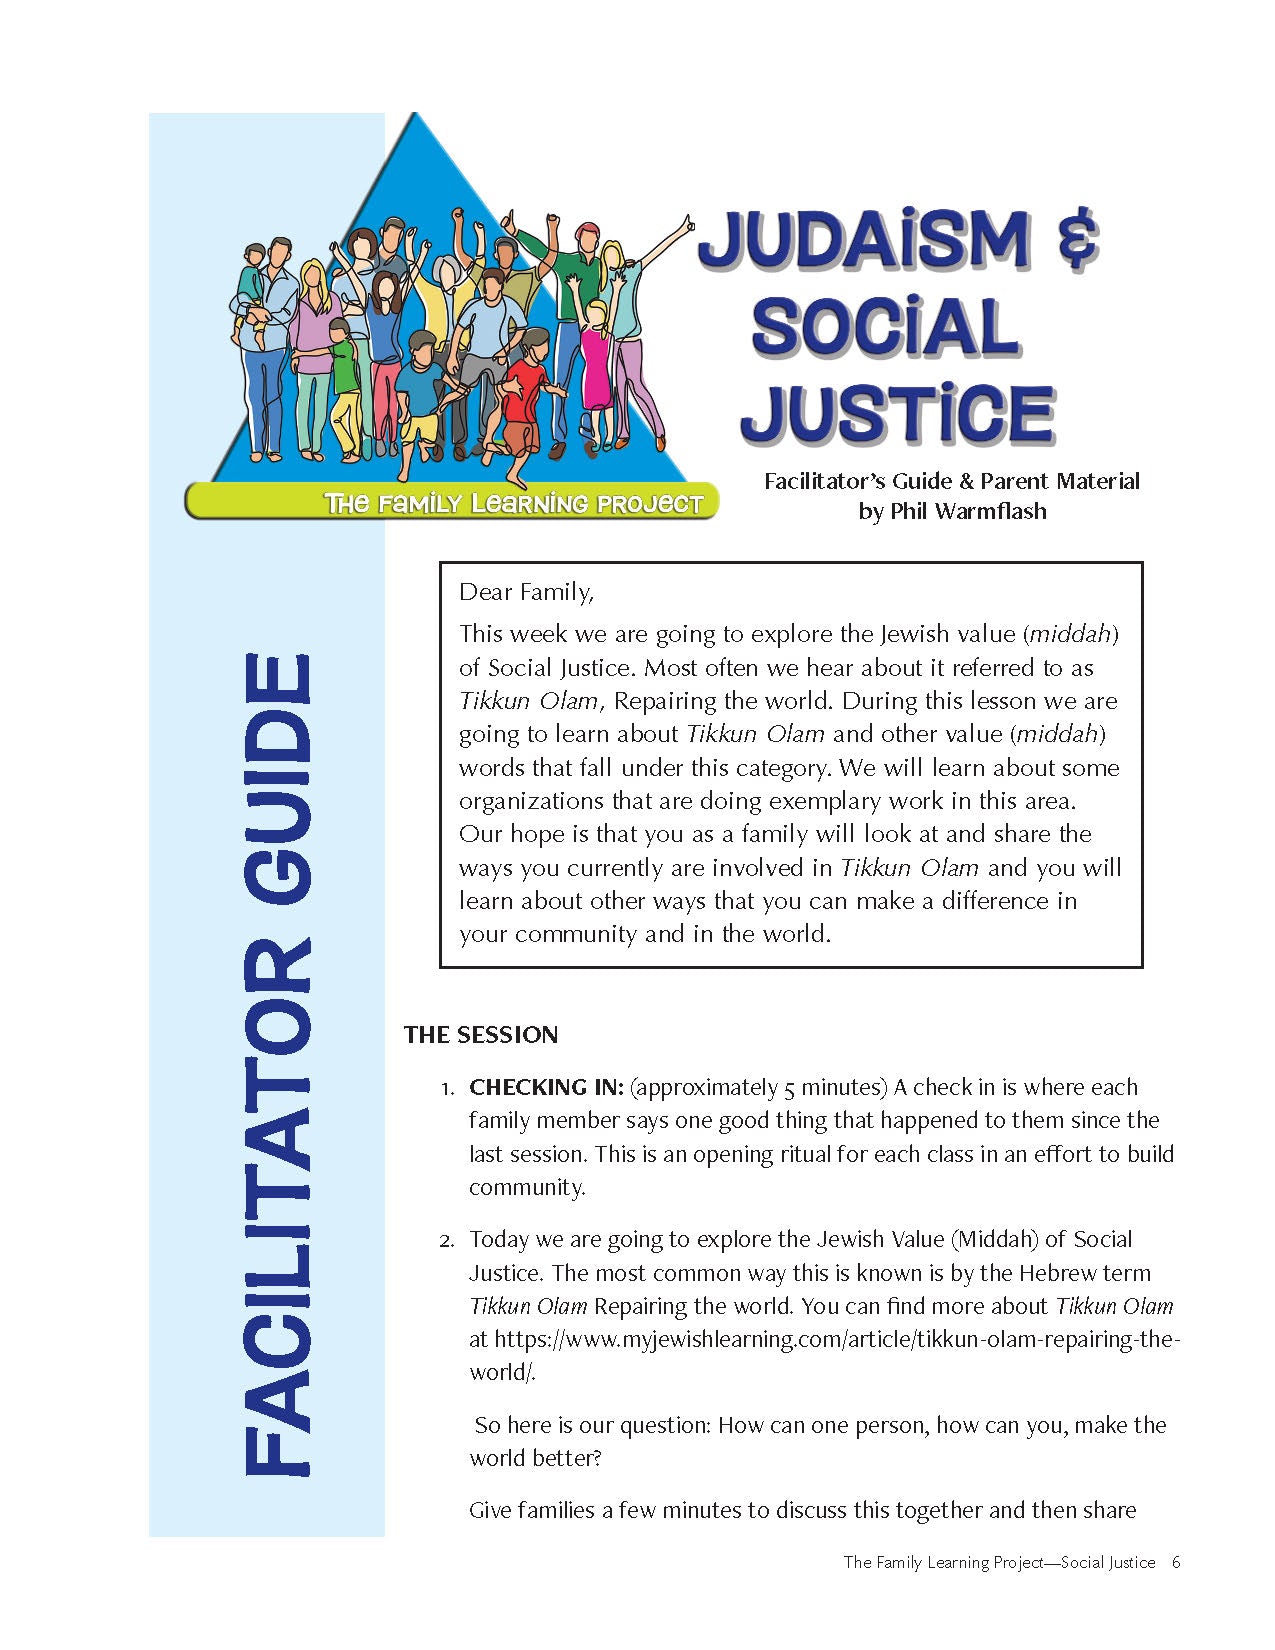 Family Learning Project: Judaism & Social Justice